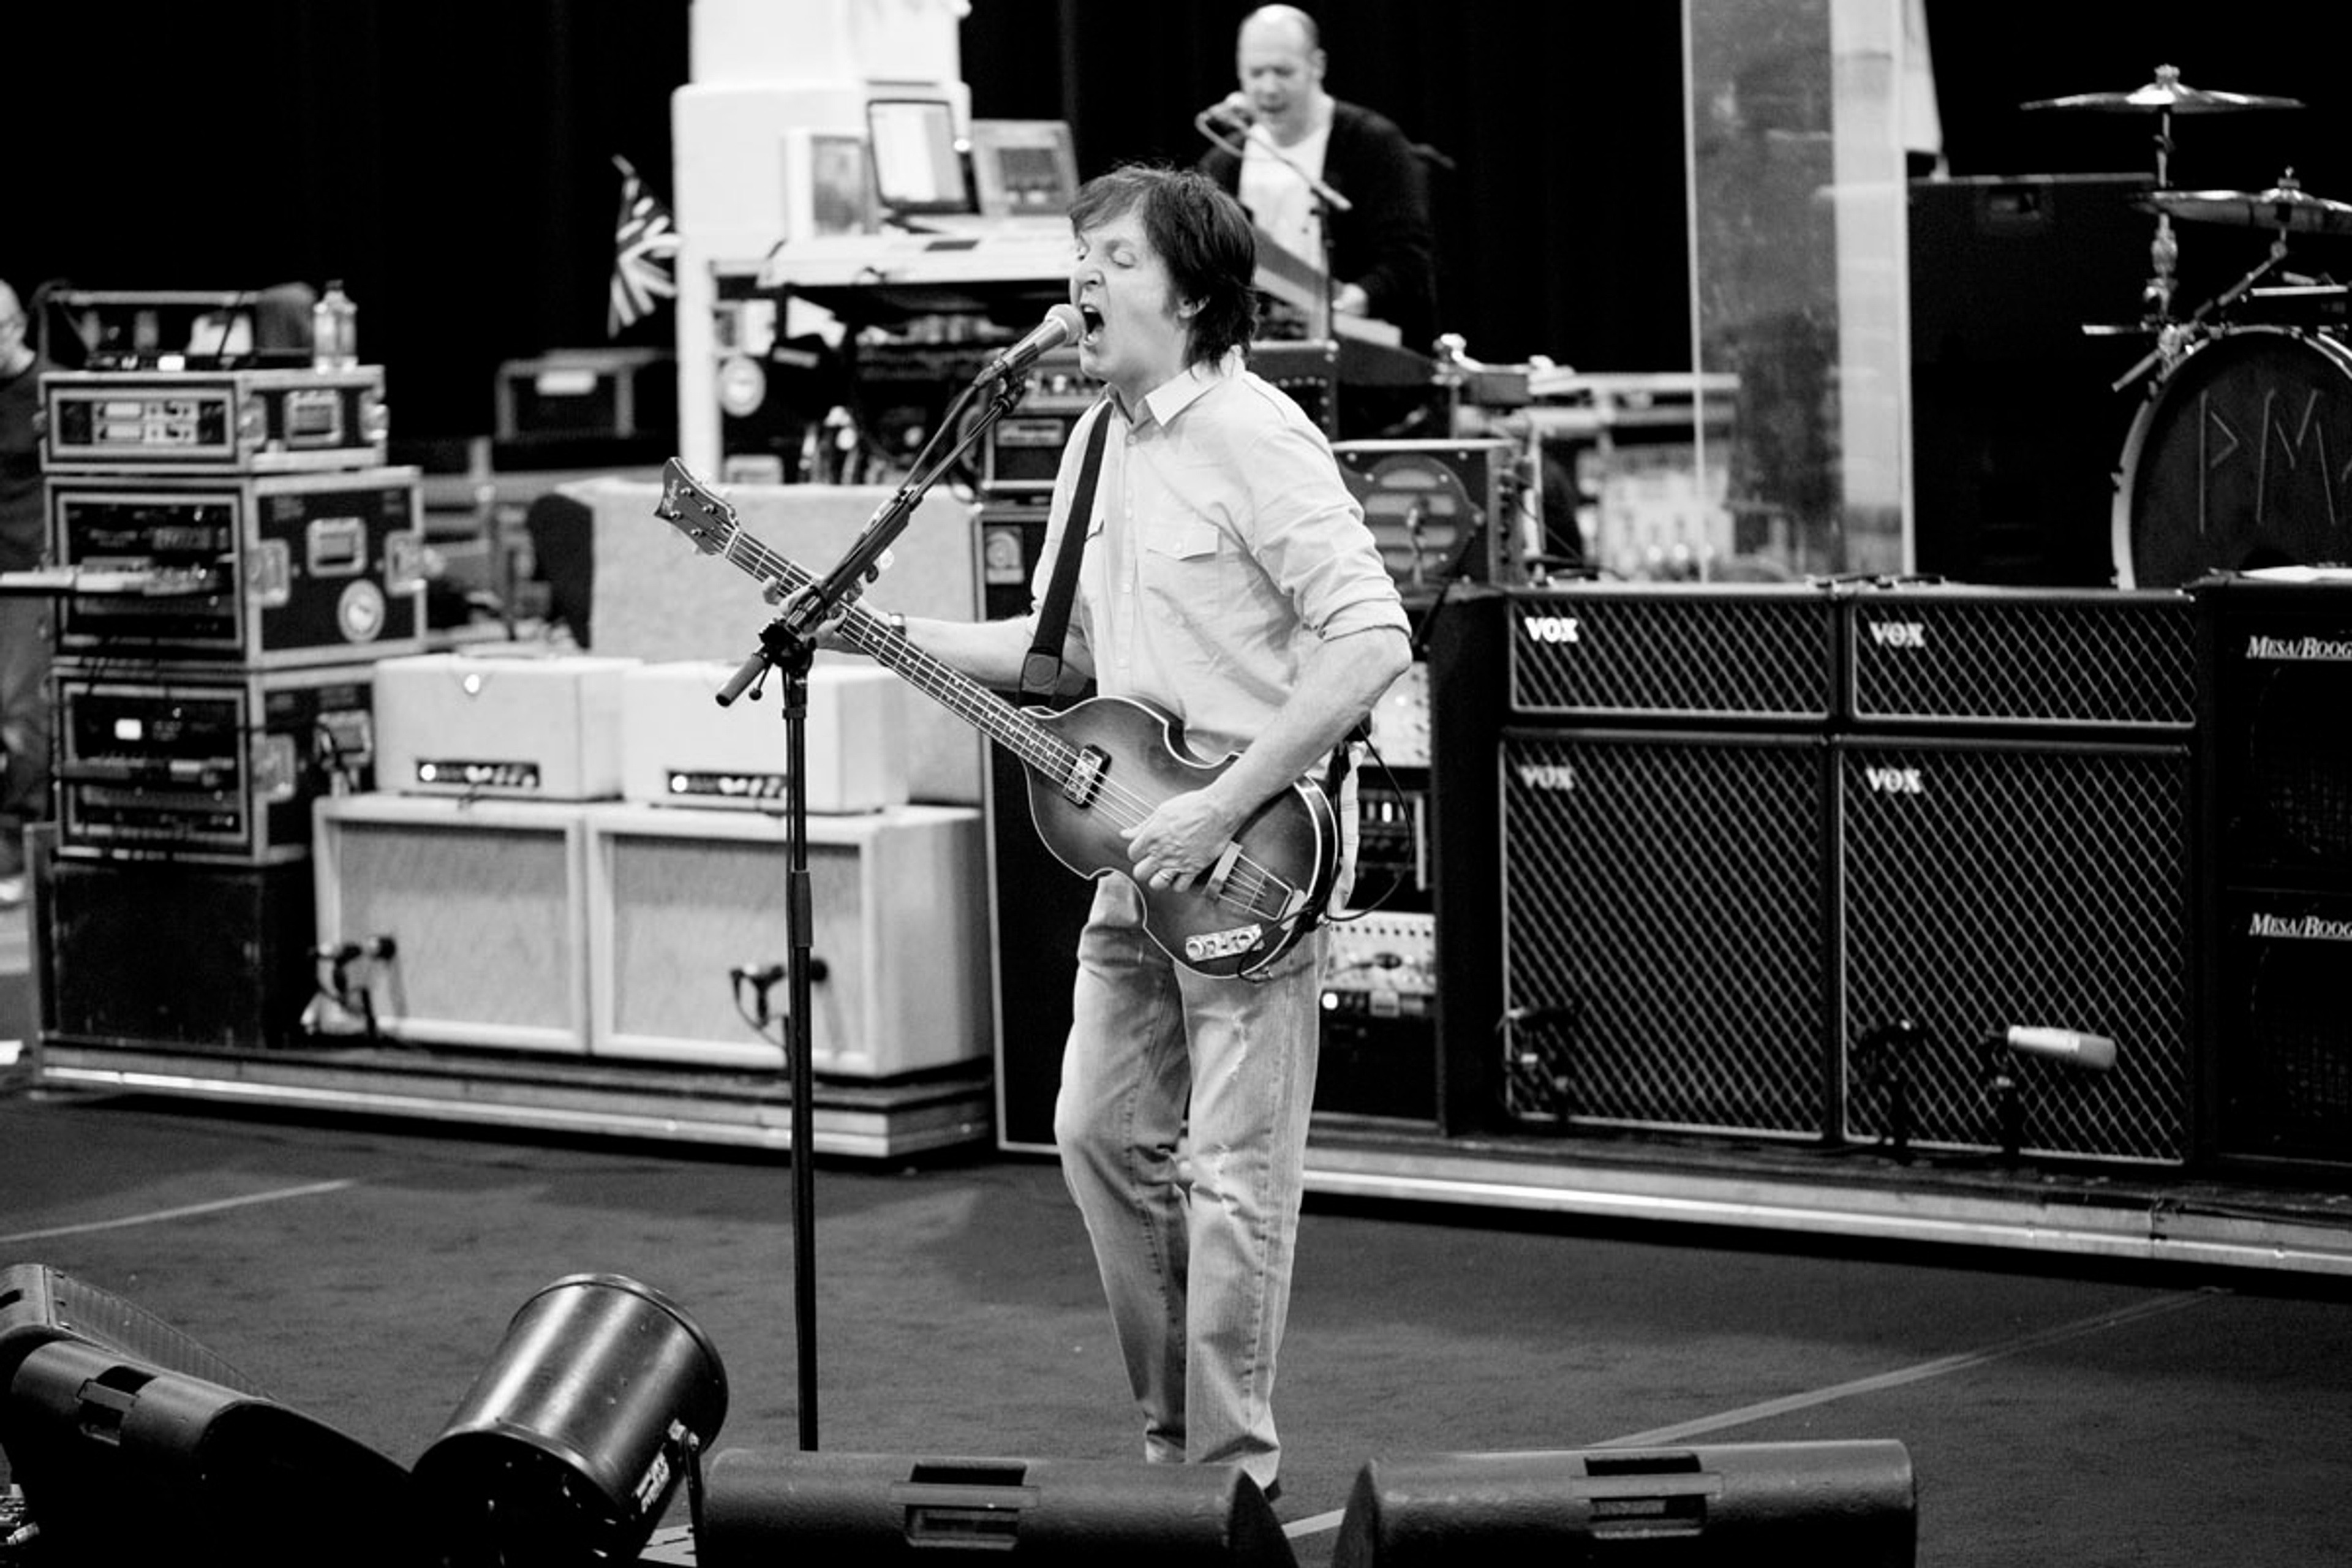 Paul and Wix at rehearsals, 12-12-12 Hurricane Sandy Benefit, Madison Square Garden, NYC, 10th December 2012